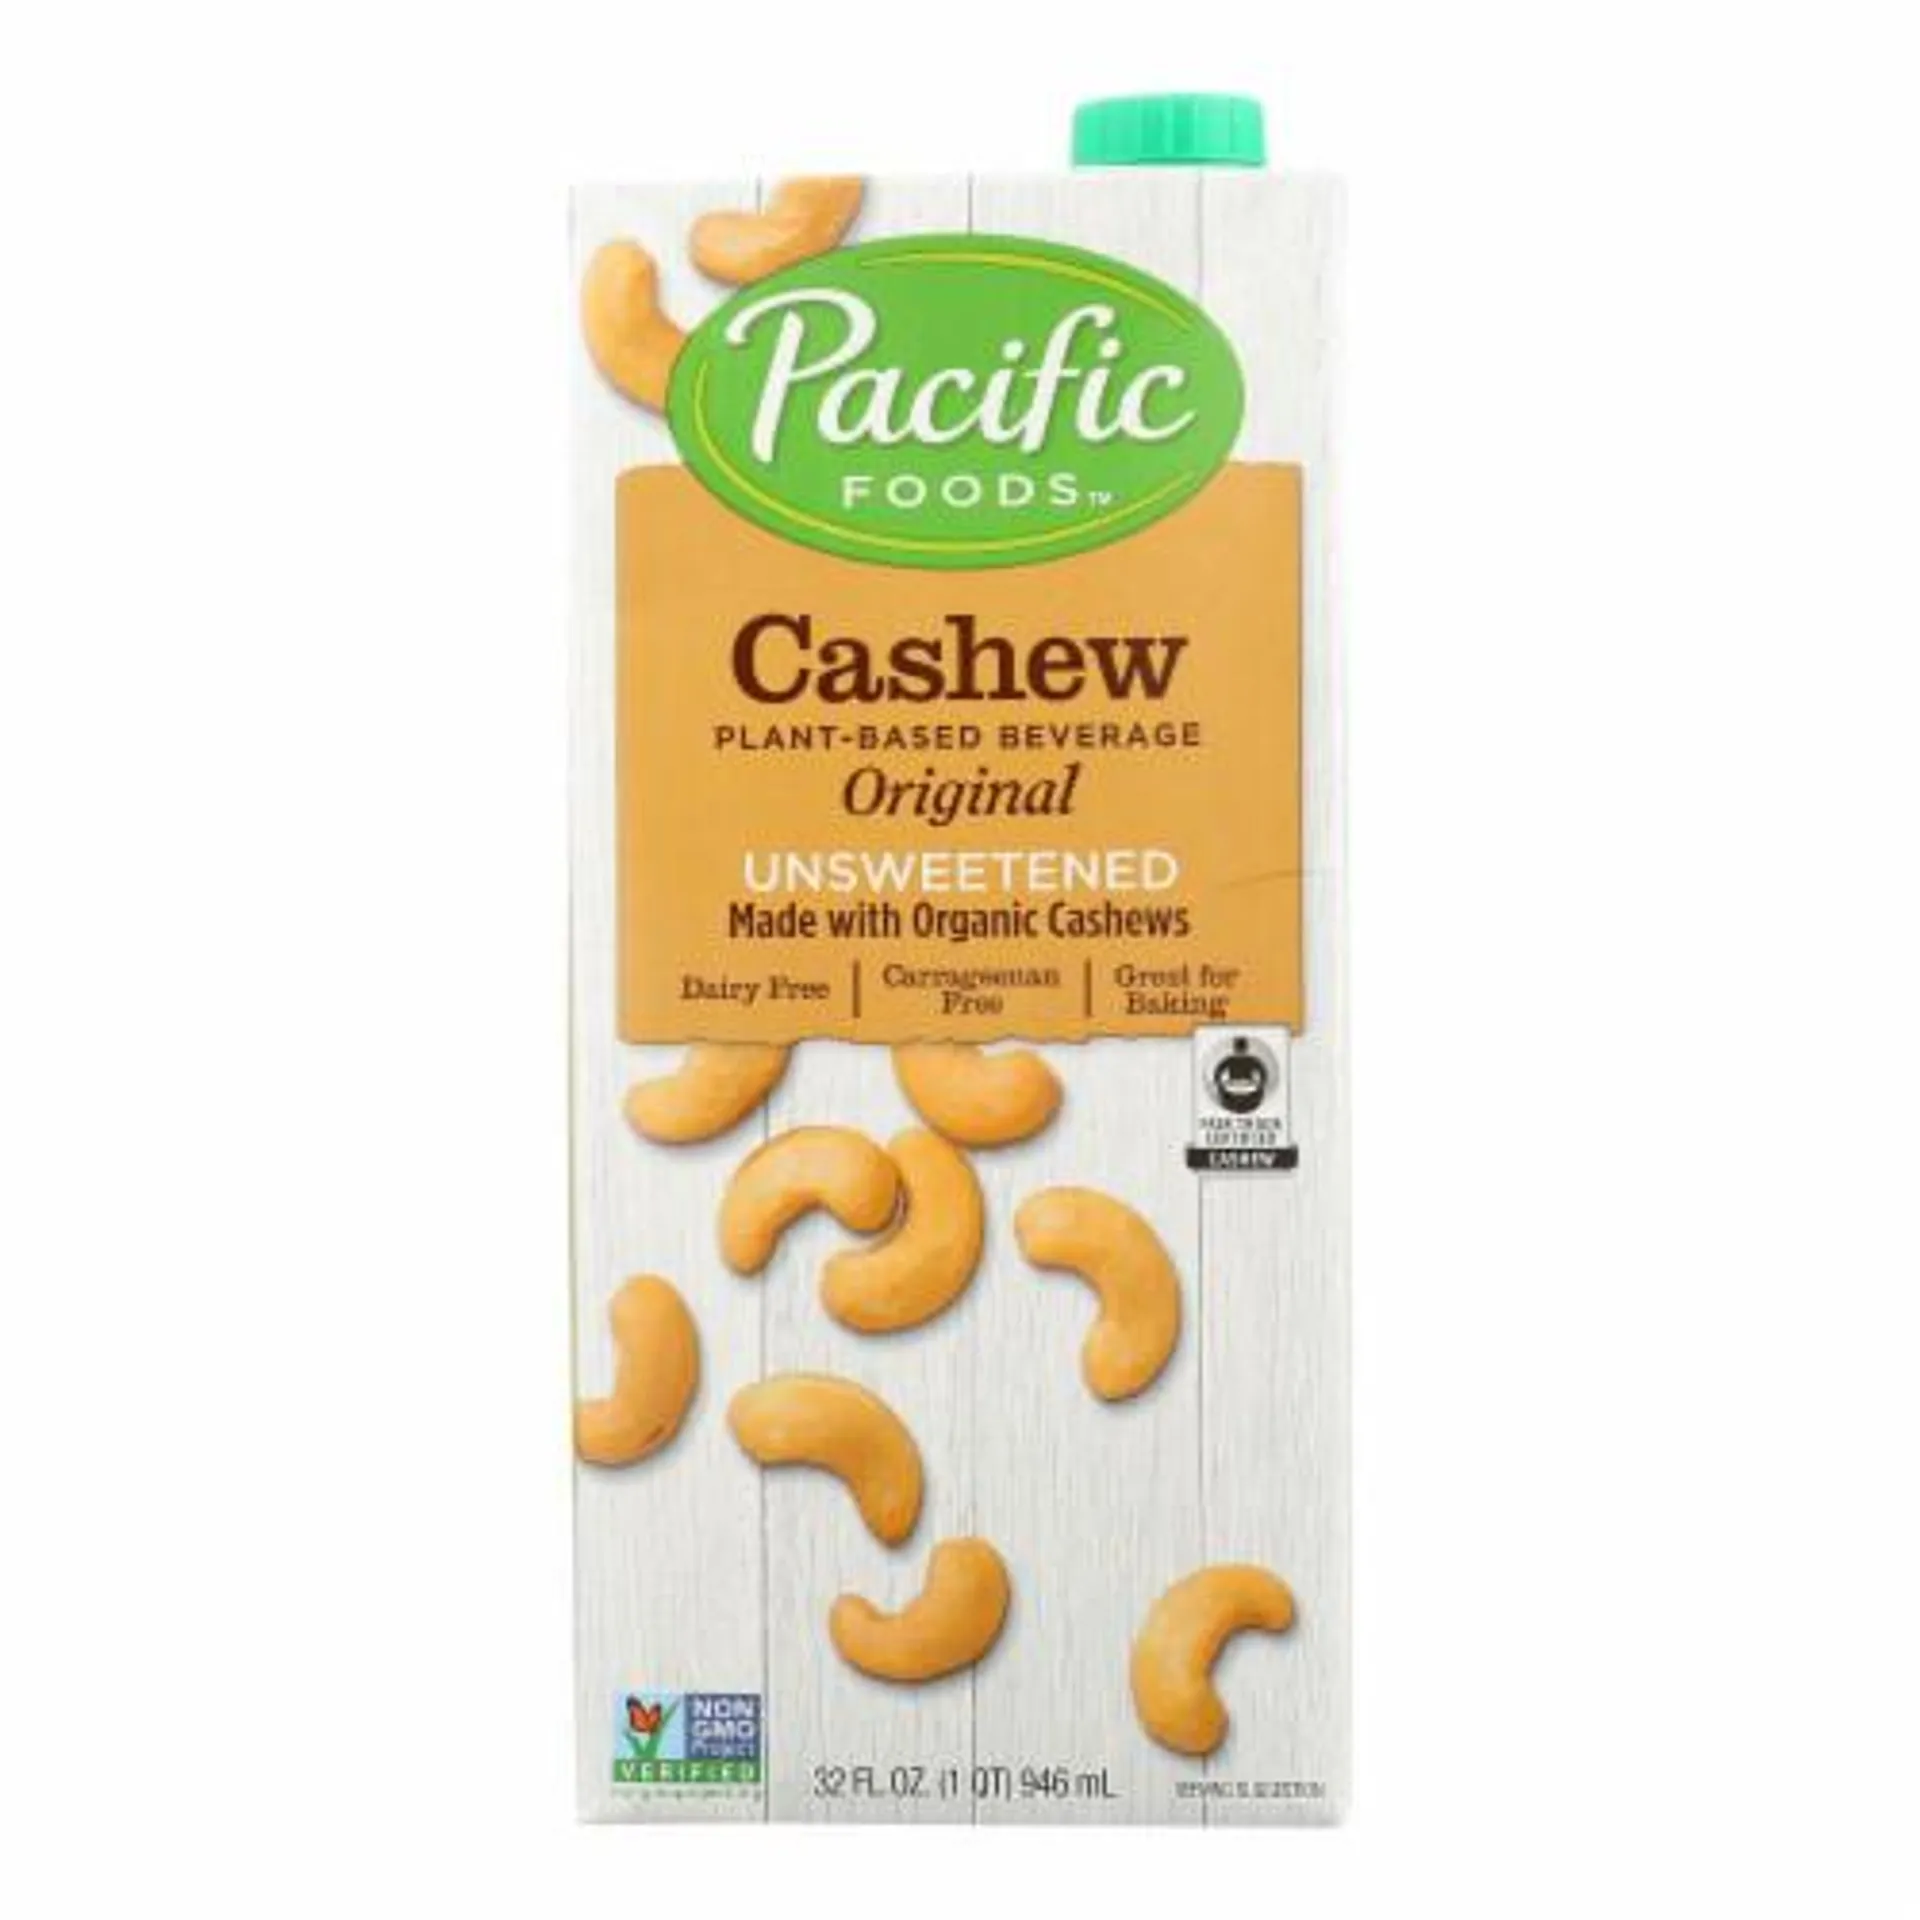 Pacific Natural Foods Cashew Beverage - Organic - Unsweetened- Case of 6 - 32 fl oz.